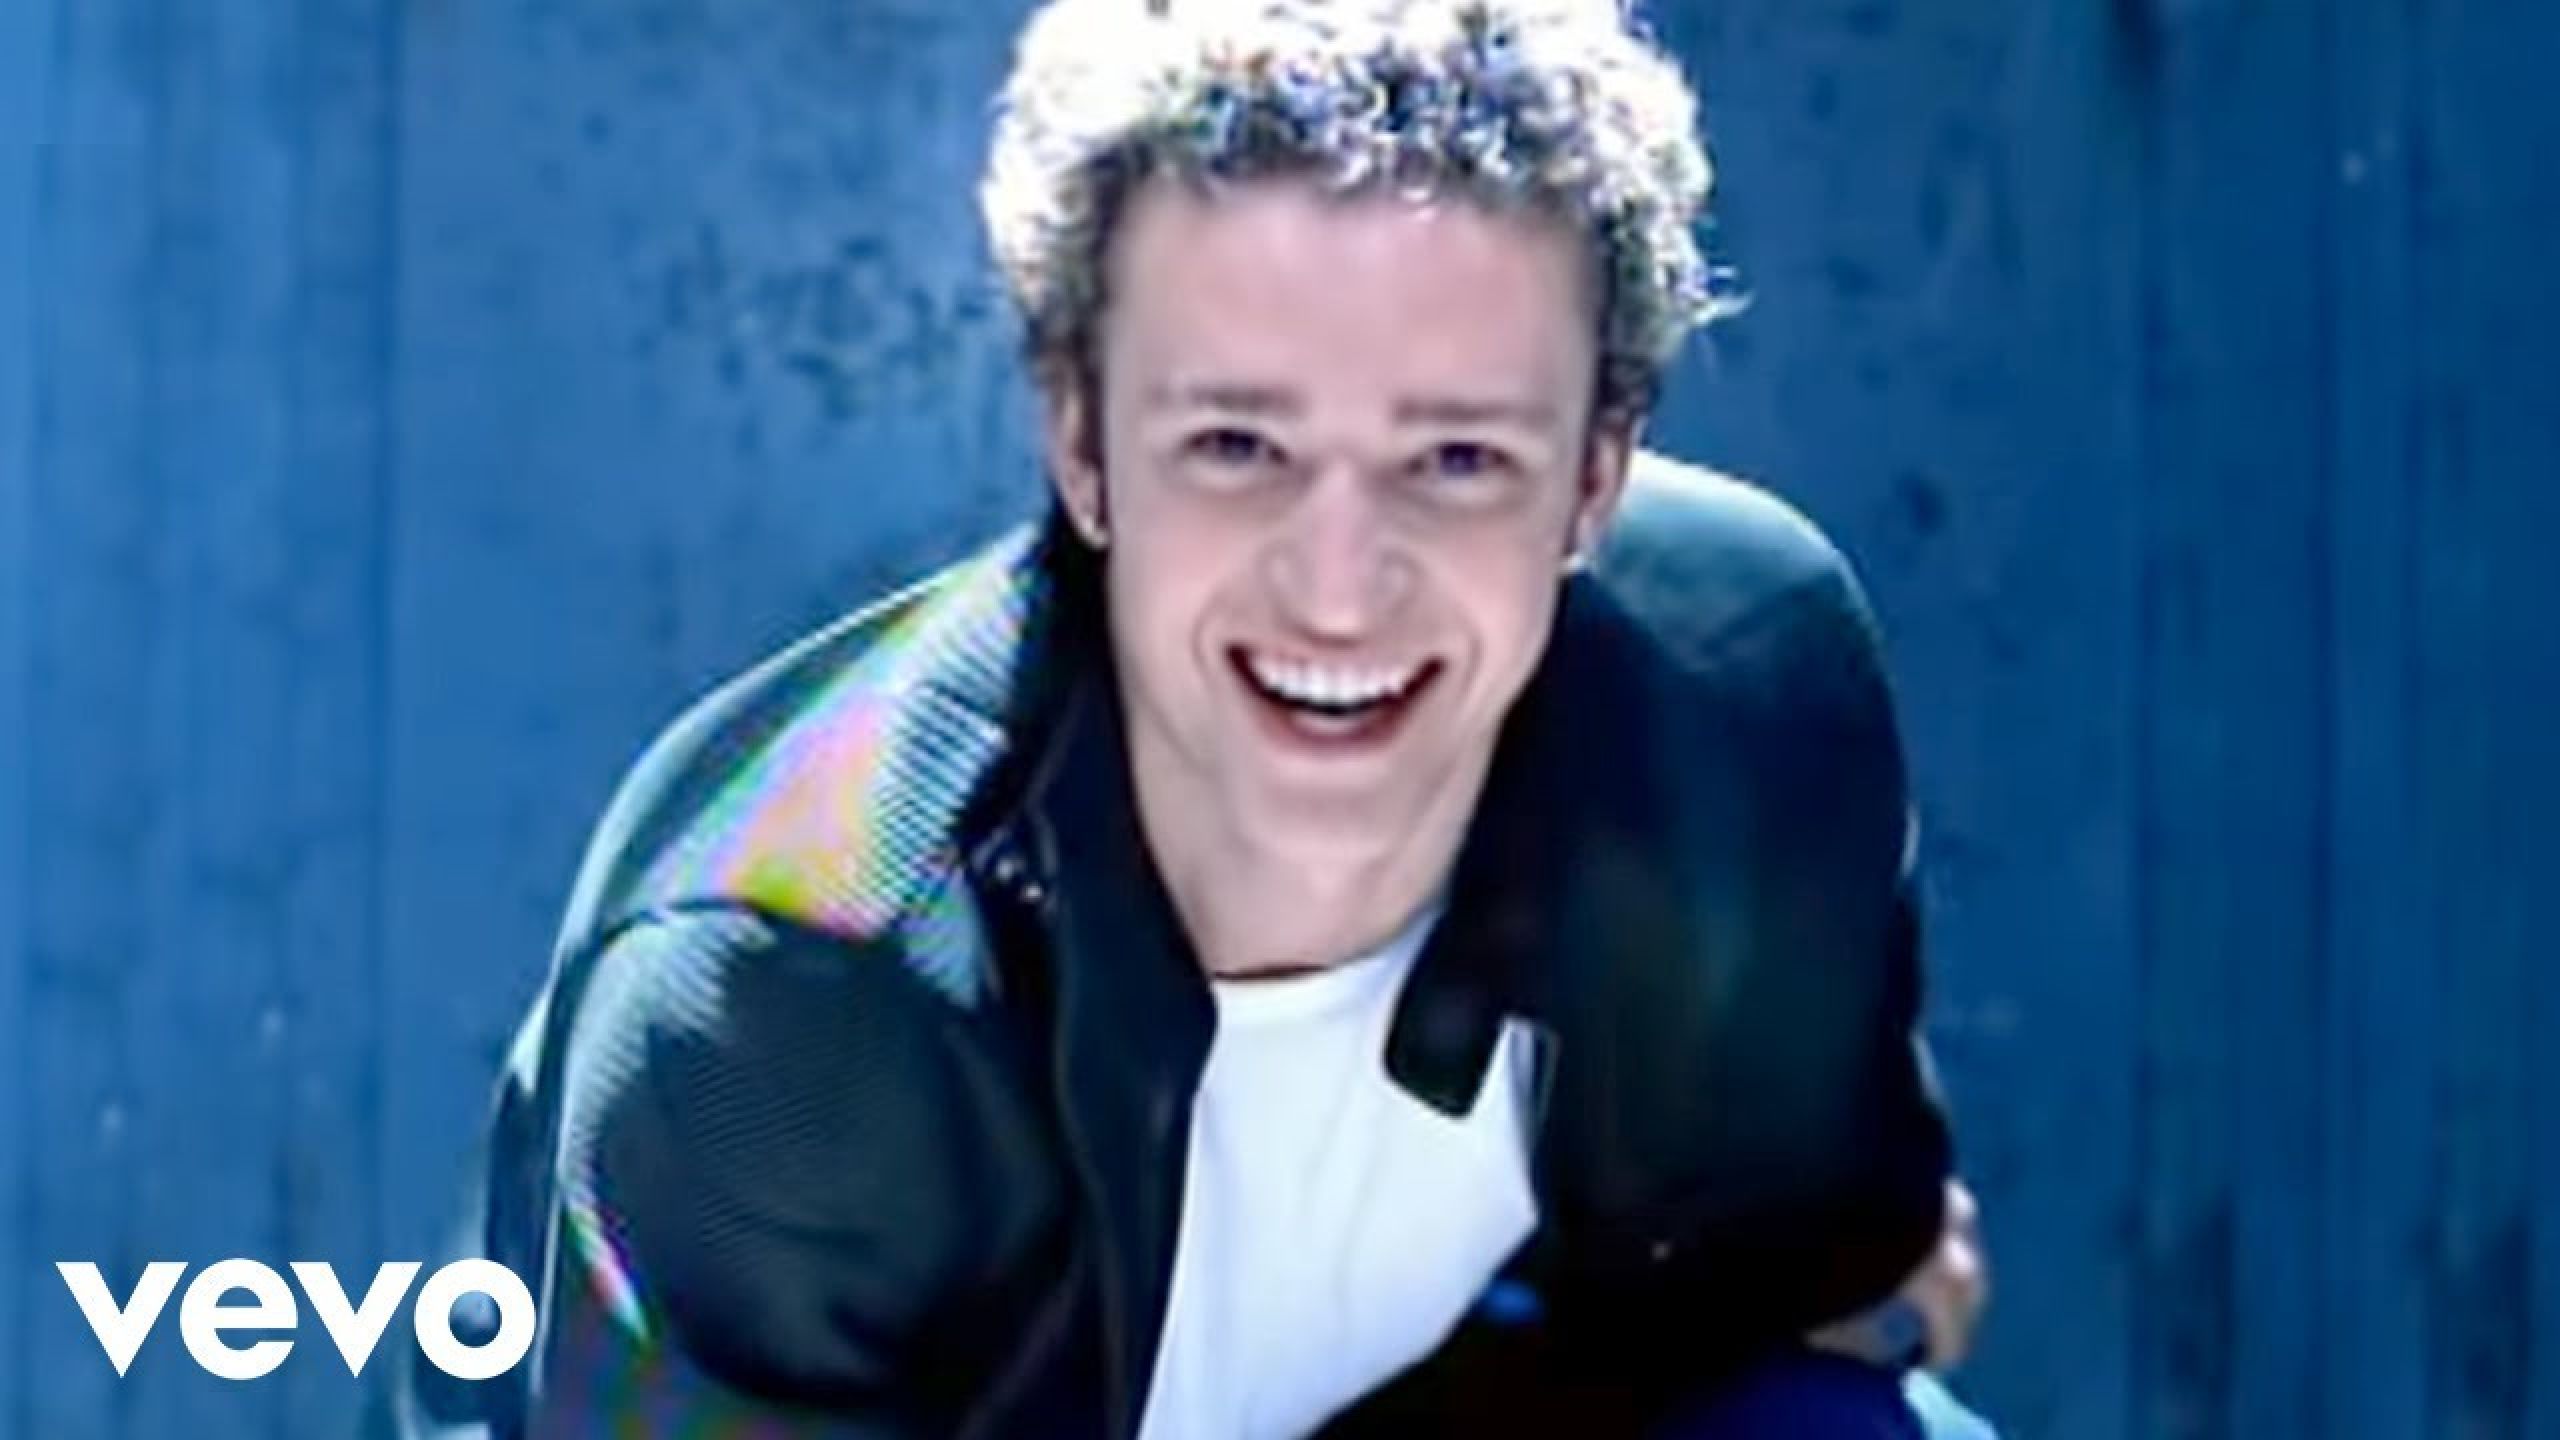 Nsync Bye Bye Bye Official Video Clothes Outfits Brands Style And Looks Spotern